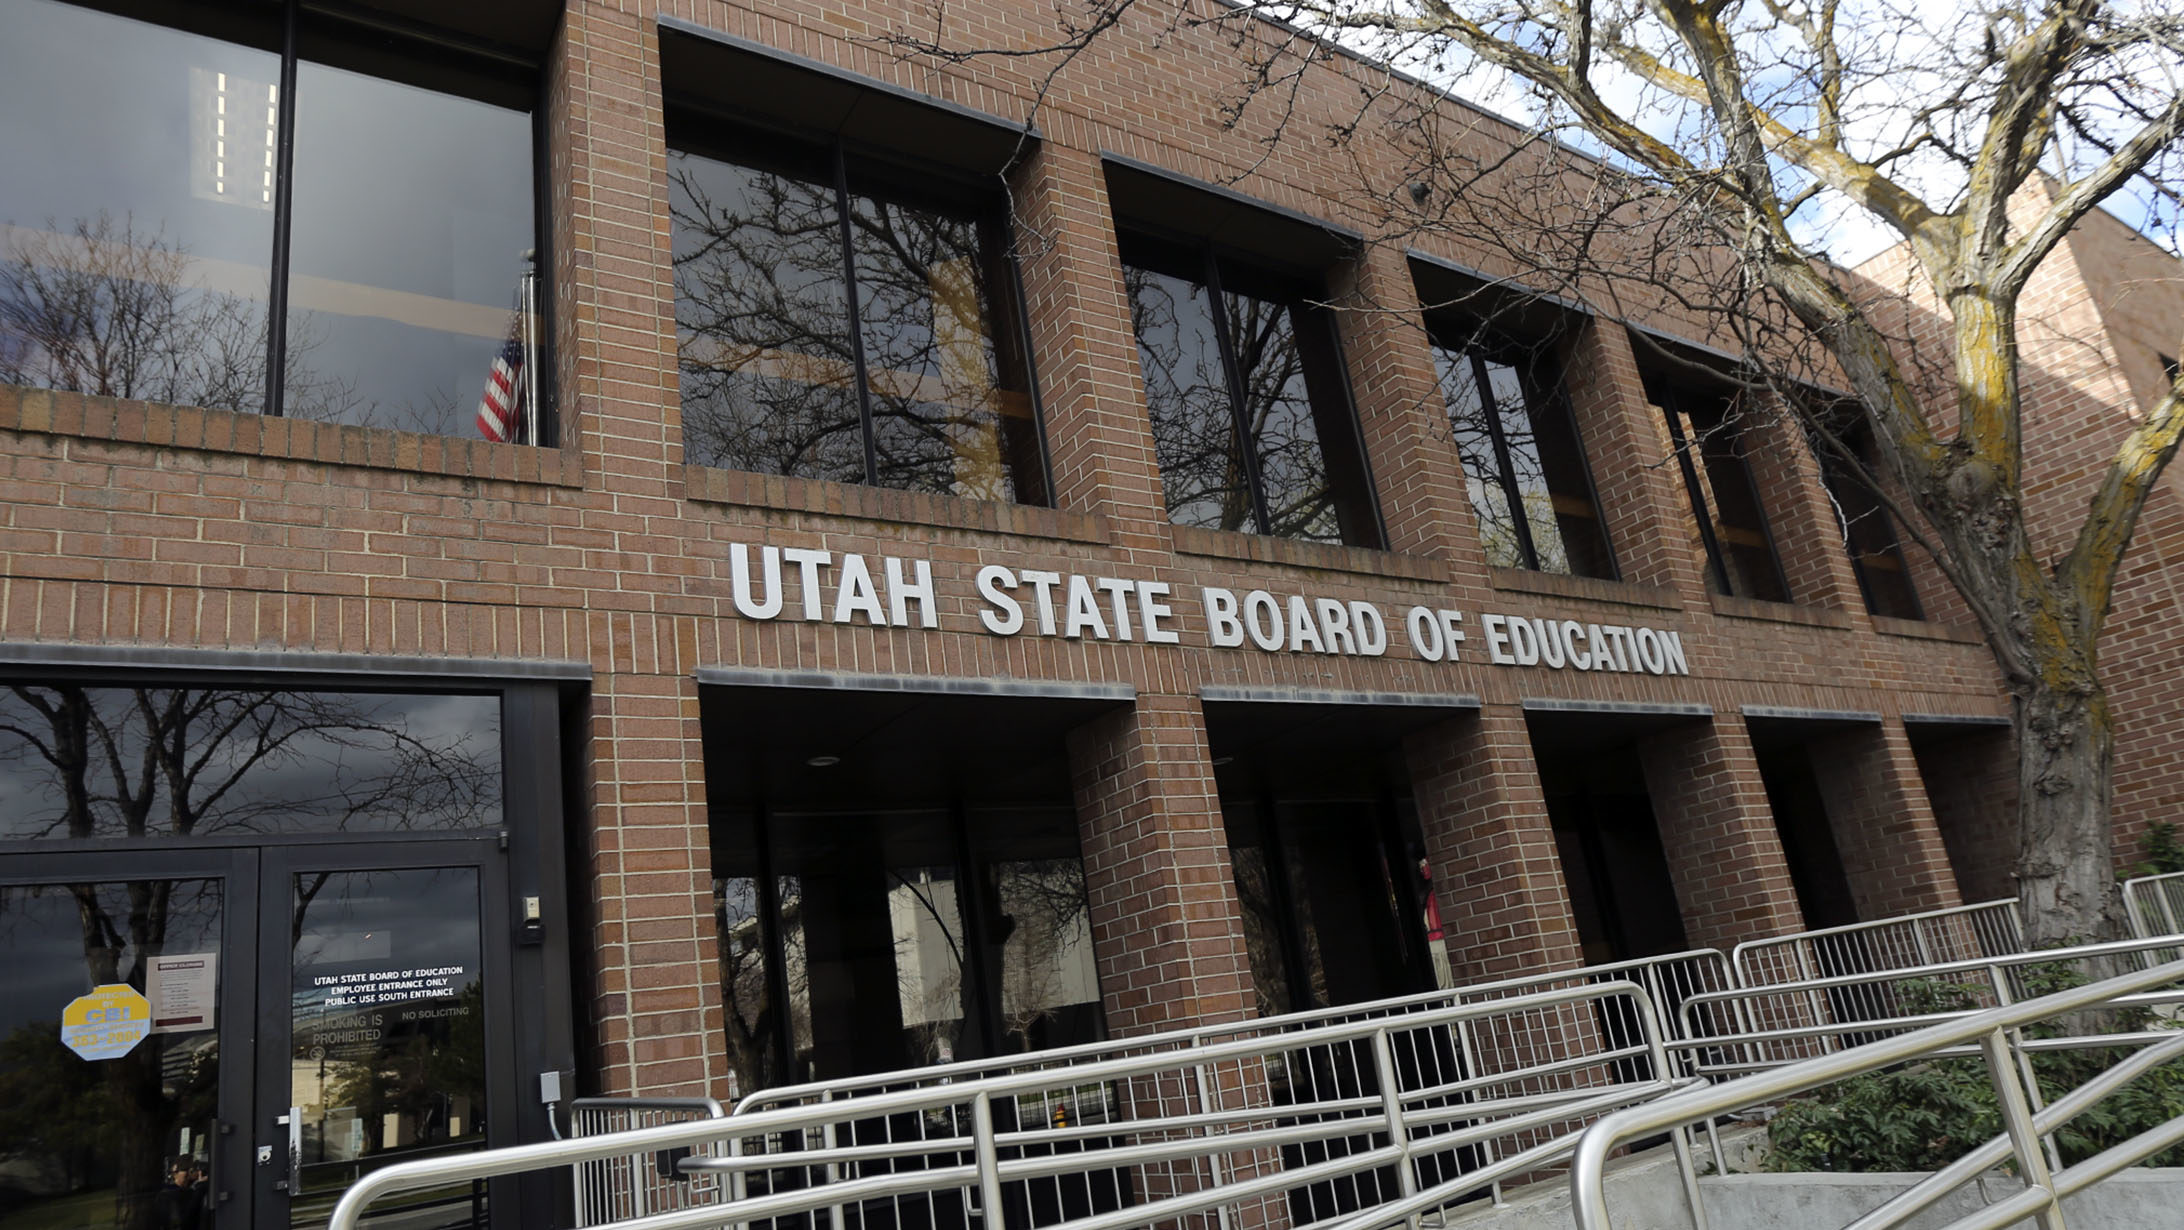 The Utah State Board of Education building in Salt Lake City is pictured on Tuesday, March 31, 2020...